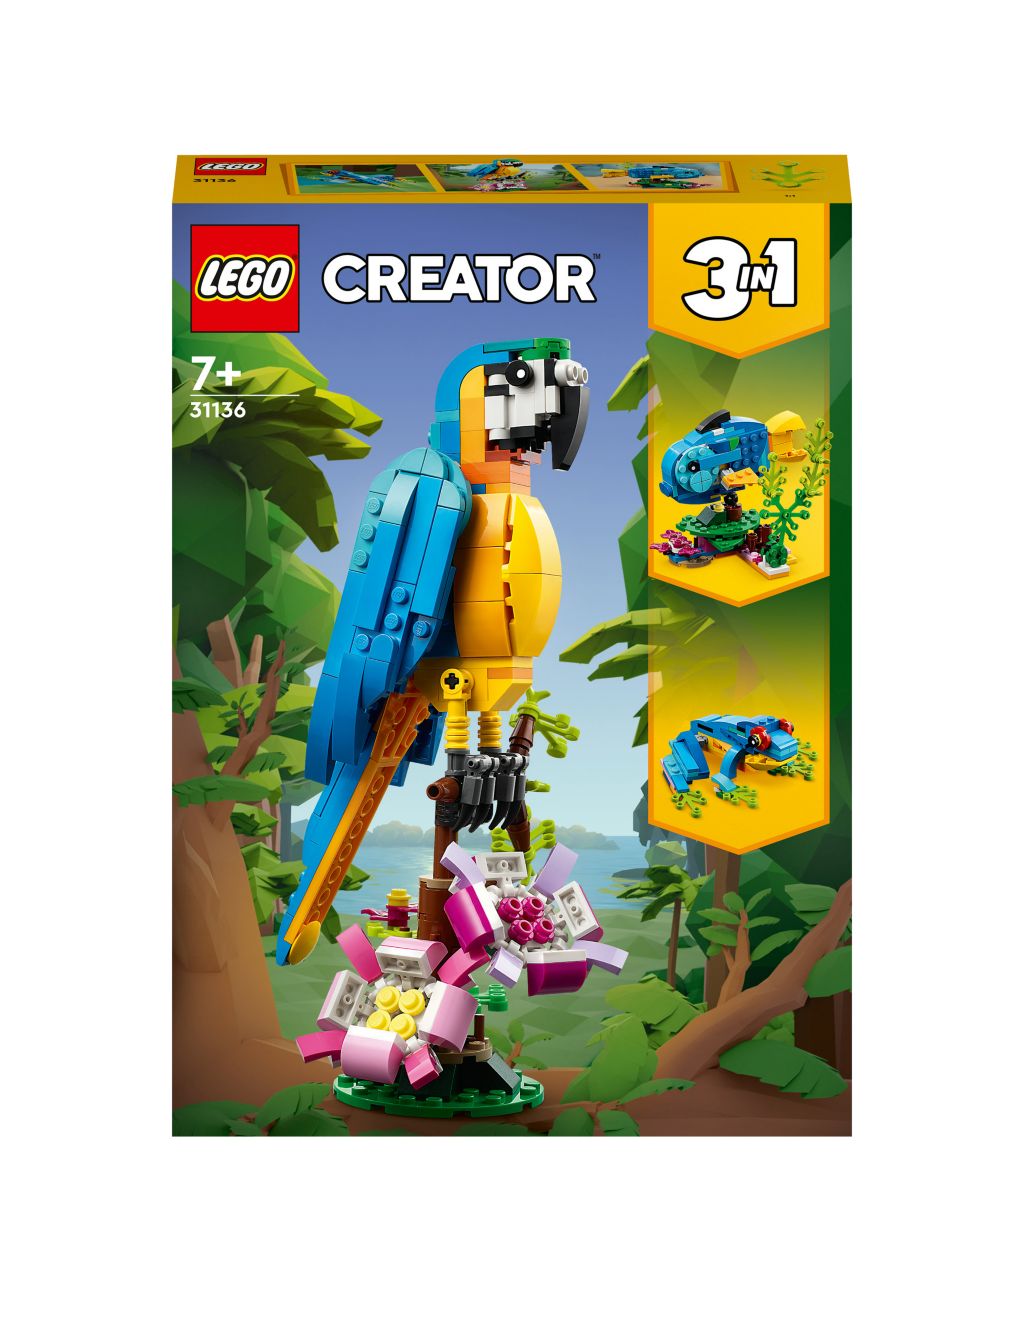 LEGO Creator 3 in 1 Exotic Parrot Toy Set (7+ Yrs) image 3